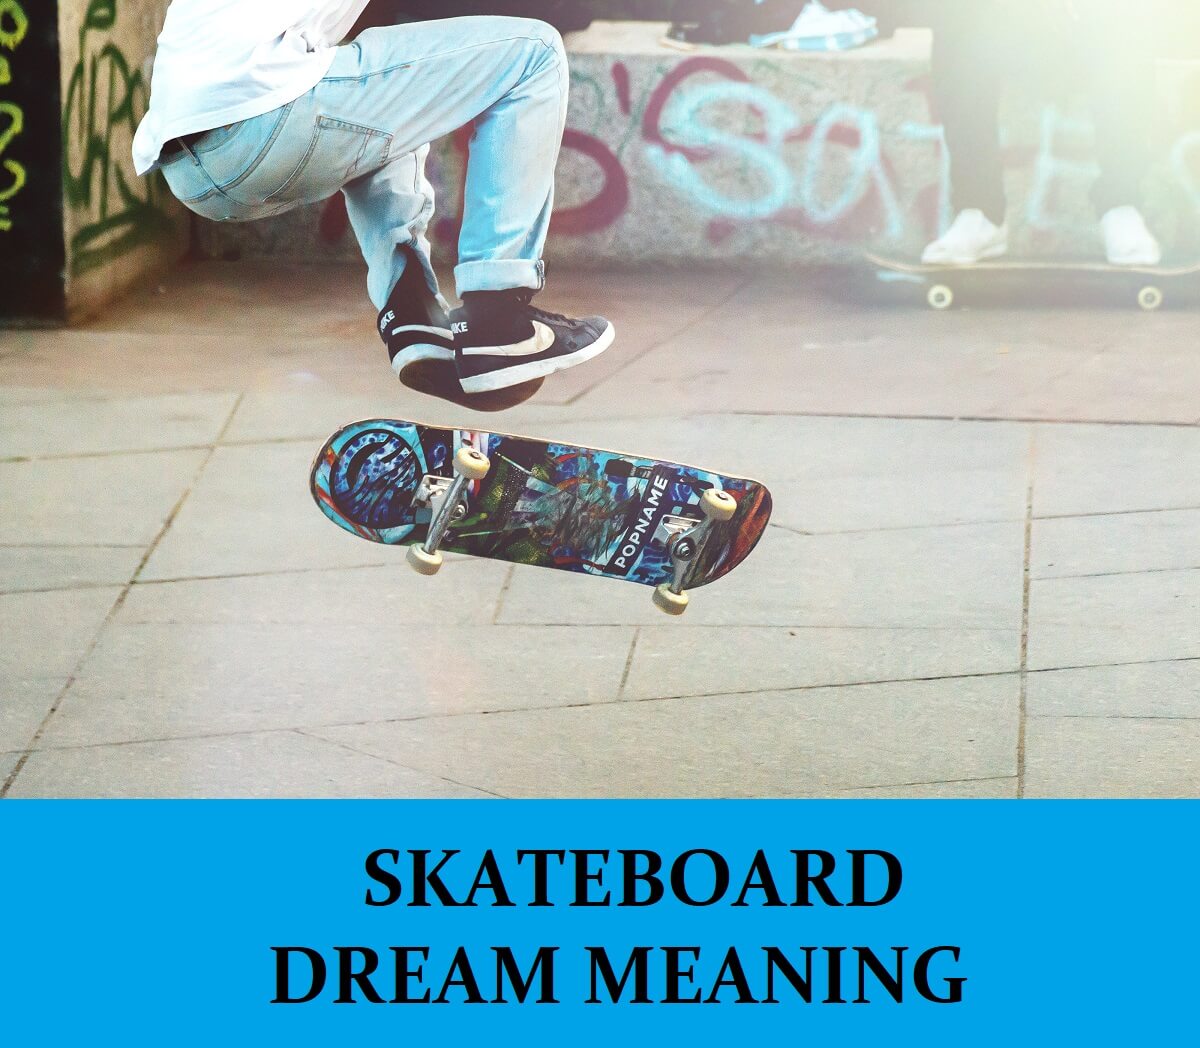 Dream About Skateboards